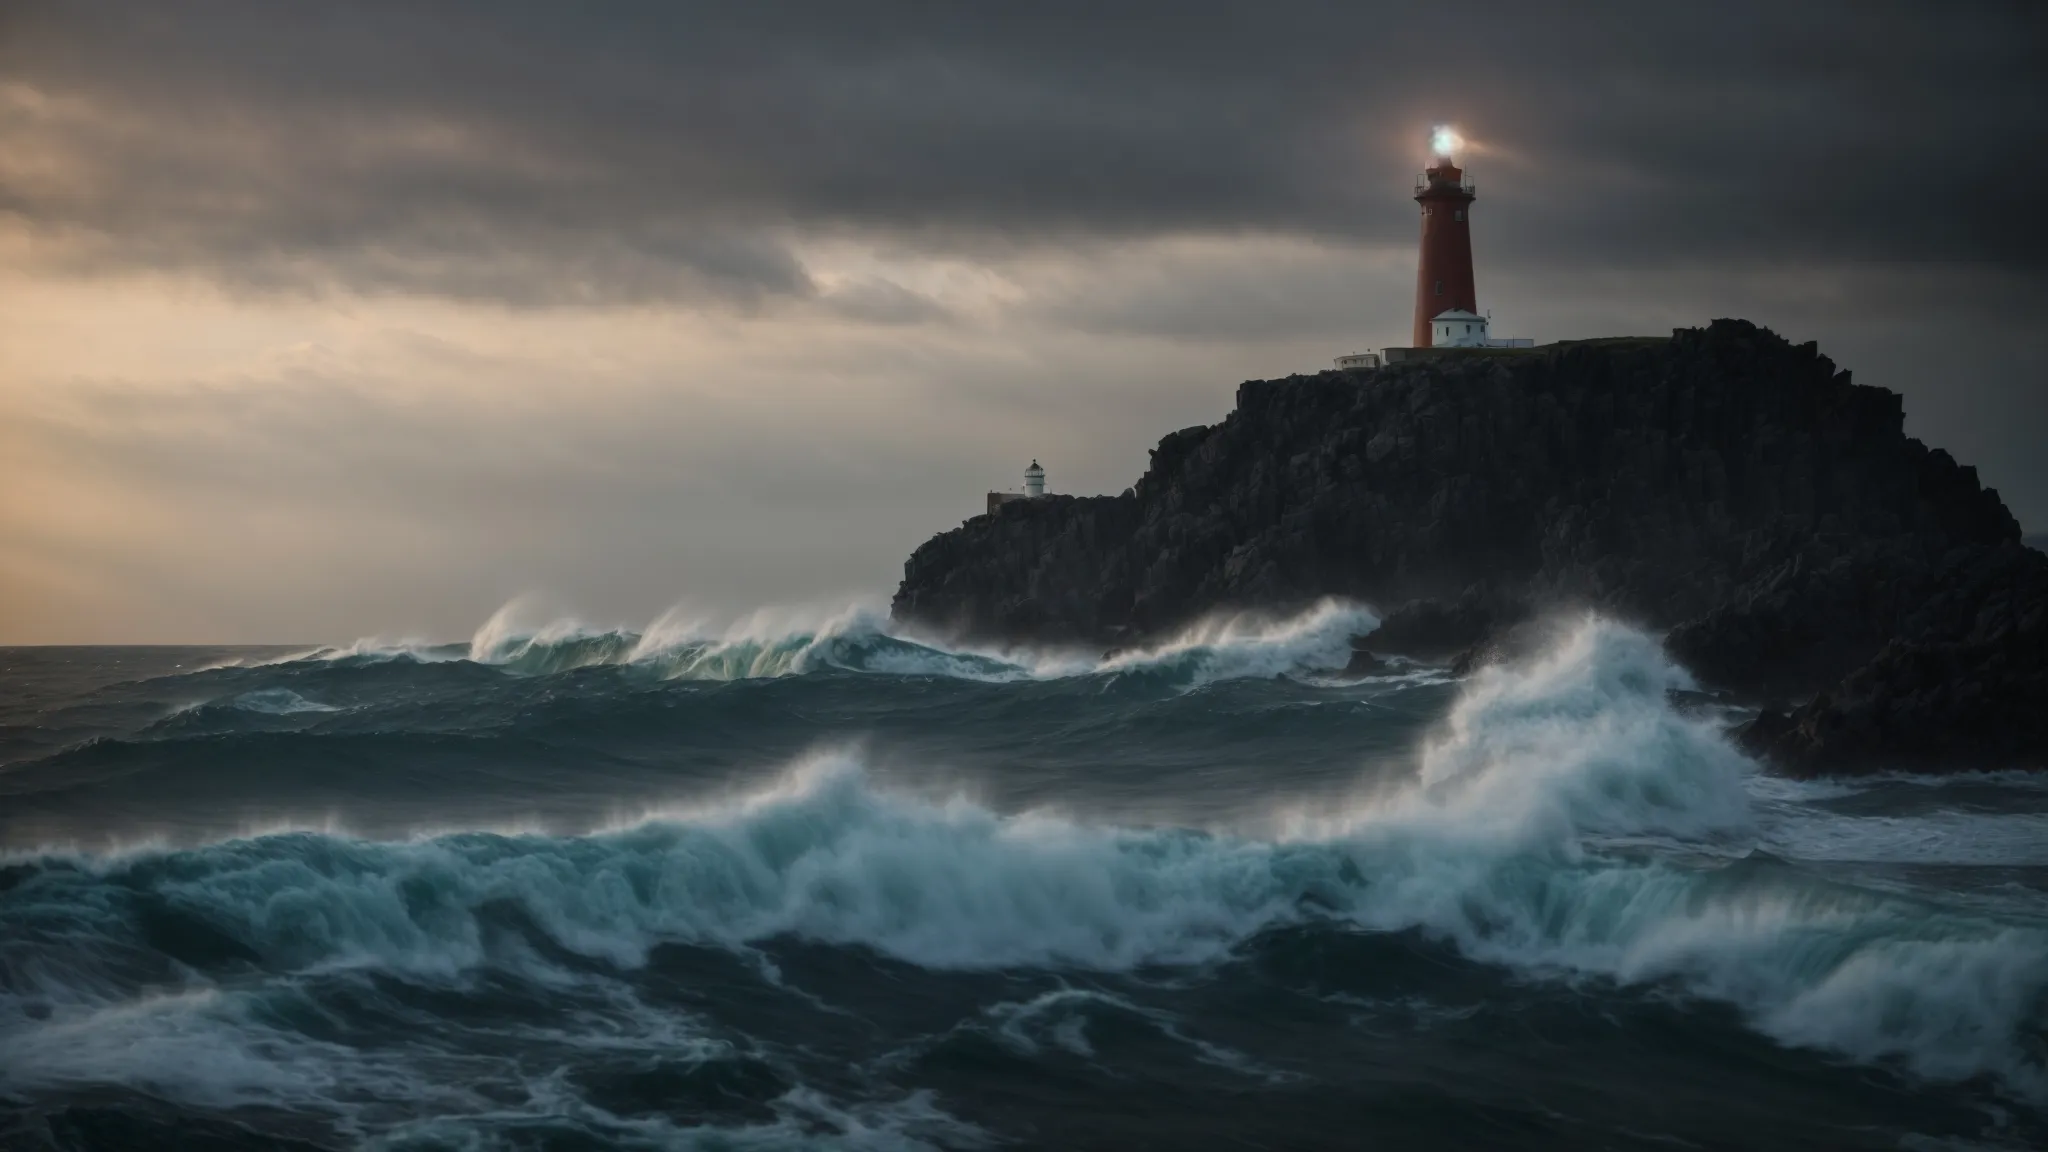 a lighthouse stands firm on a rocky coastline, guiding ships through a tumultuous sea at dusk.